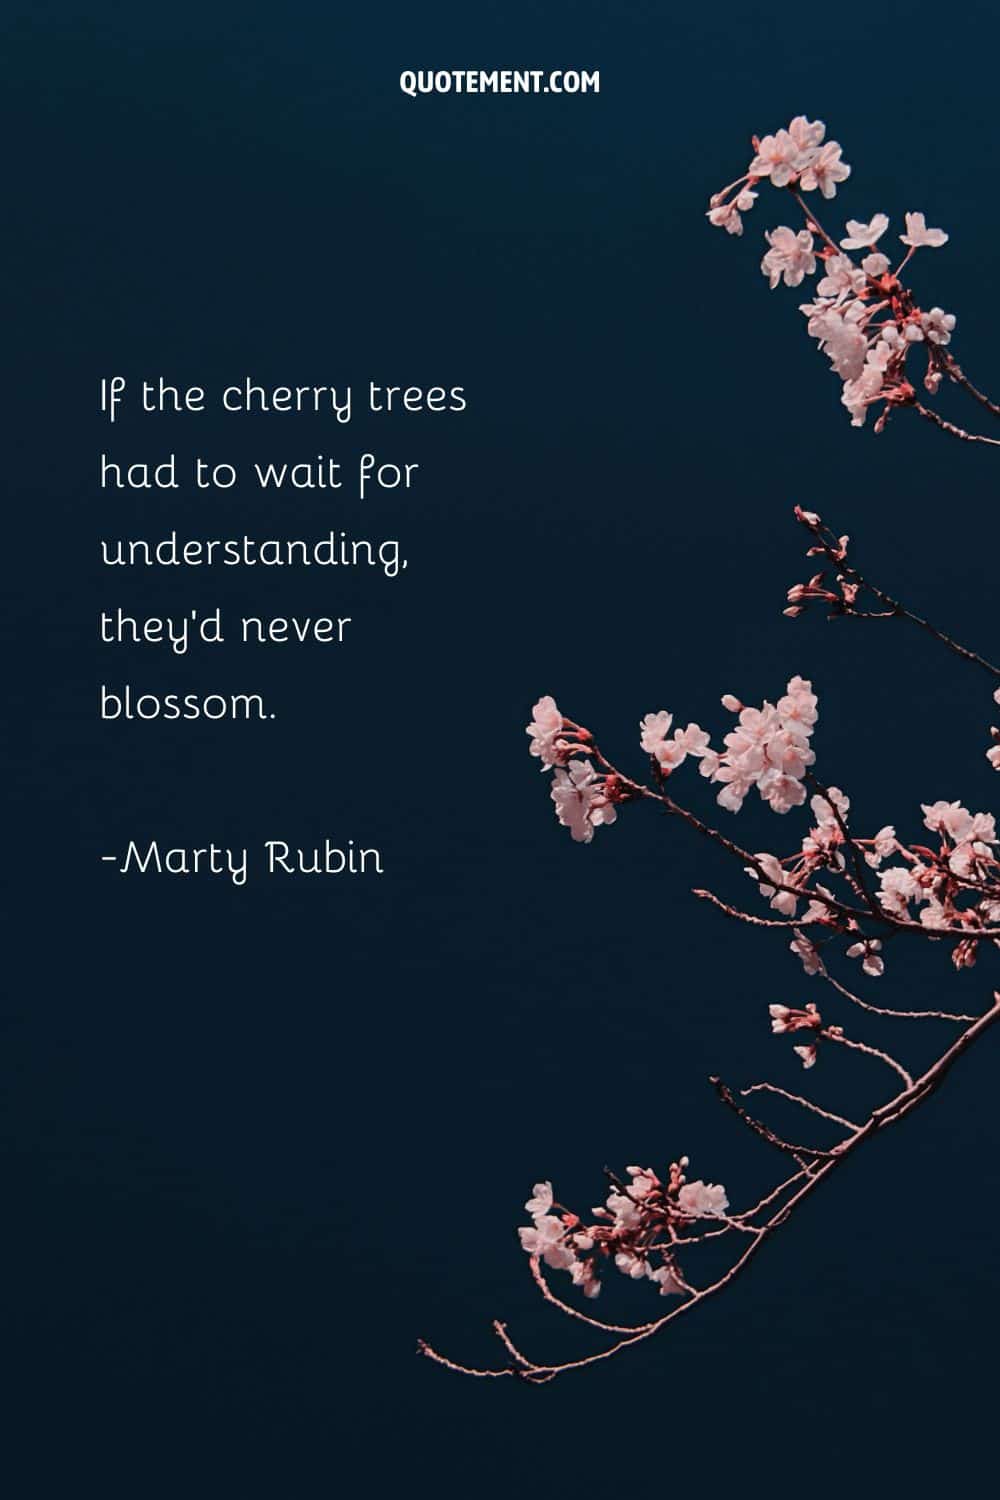 If the cherry trees had to wait for understanding, they'd never blossom